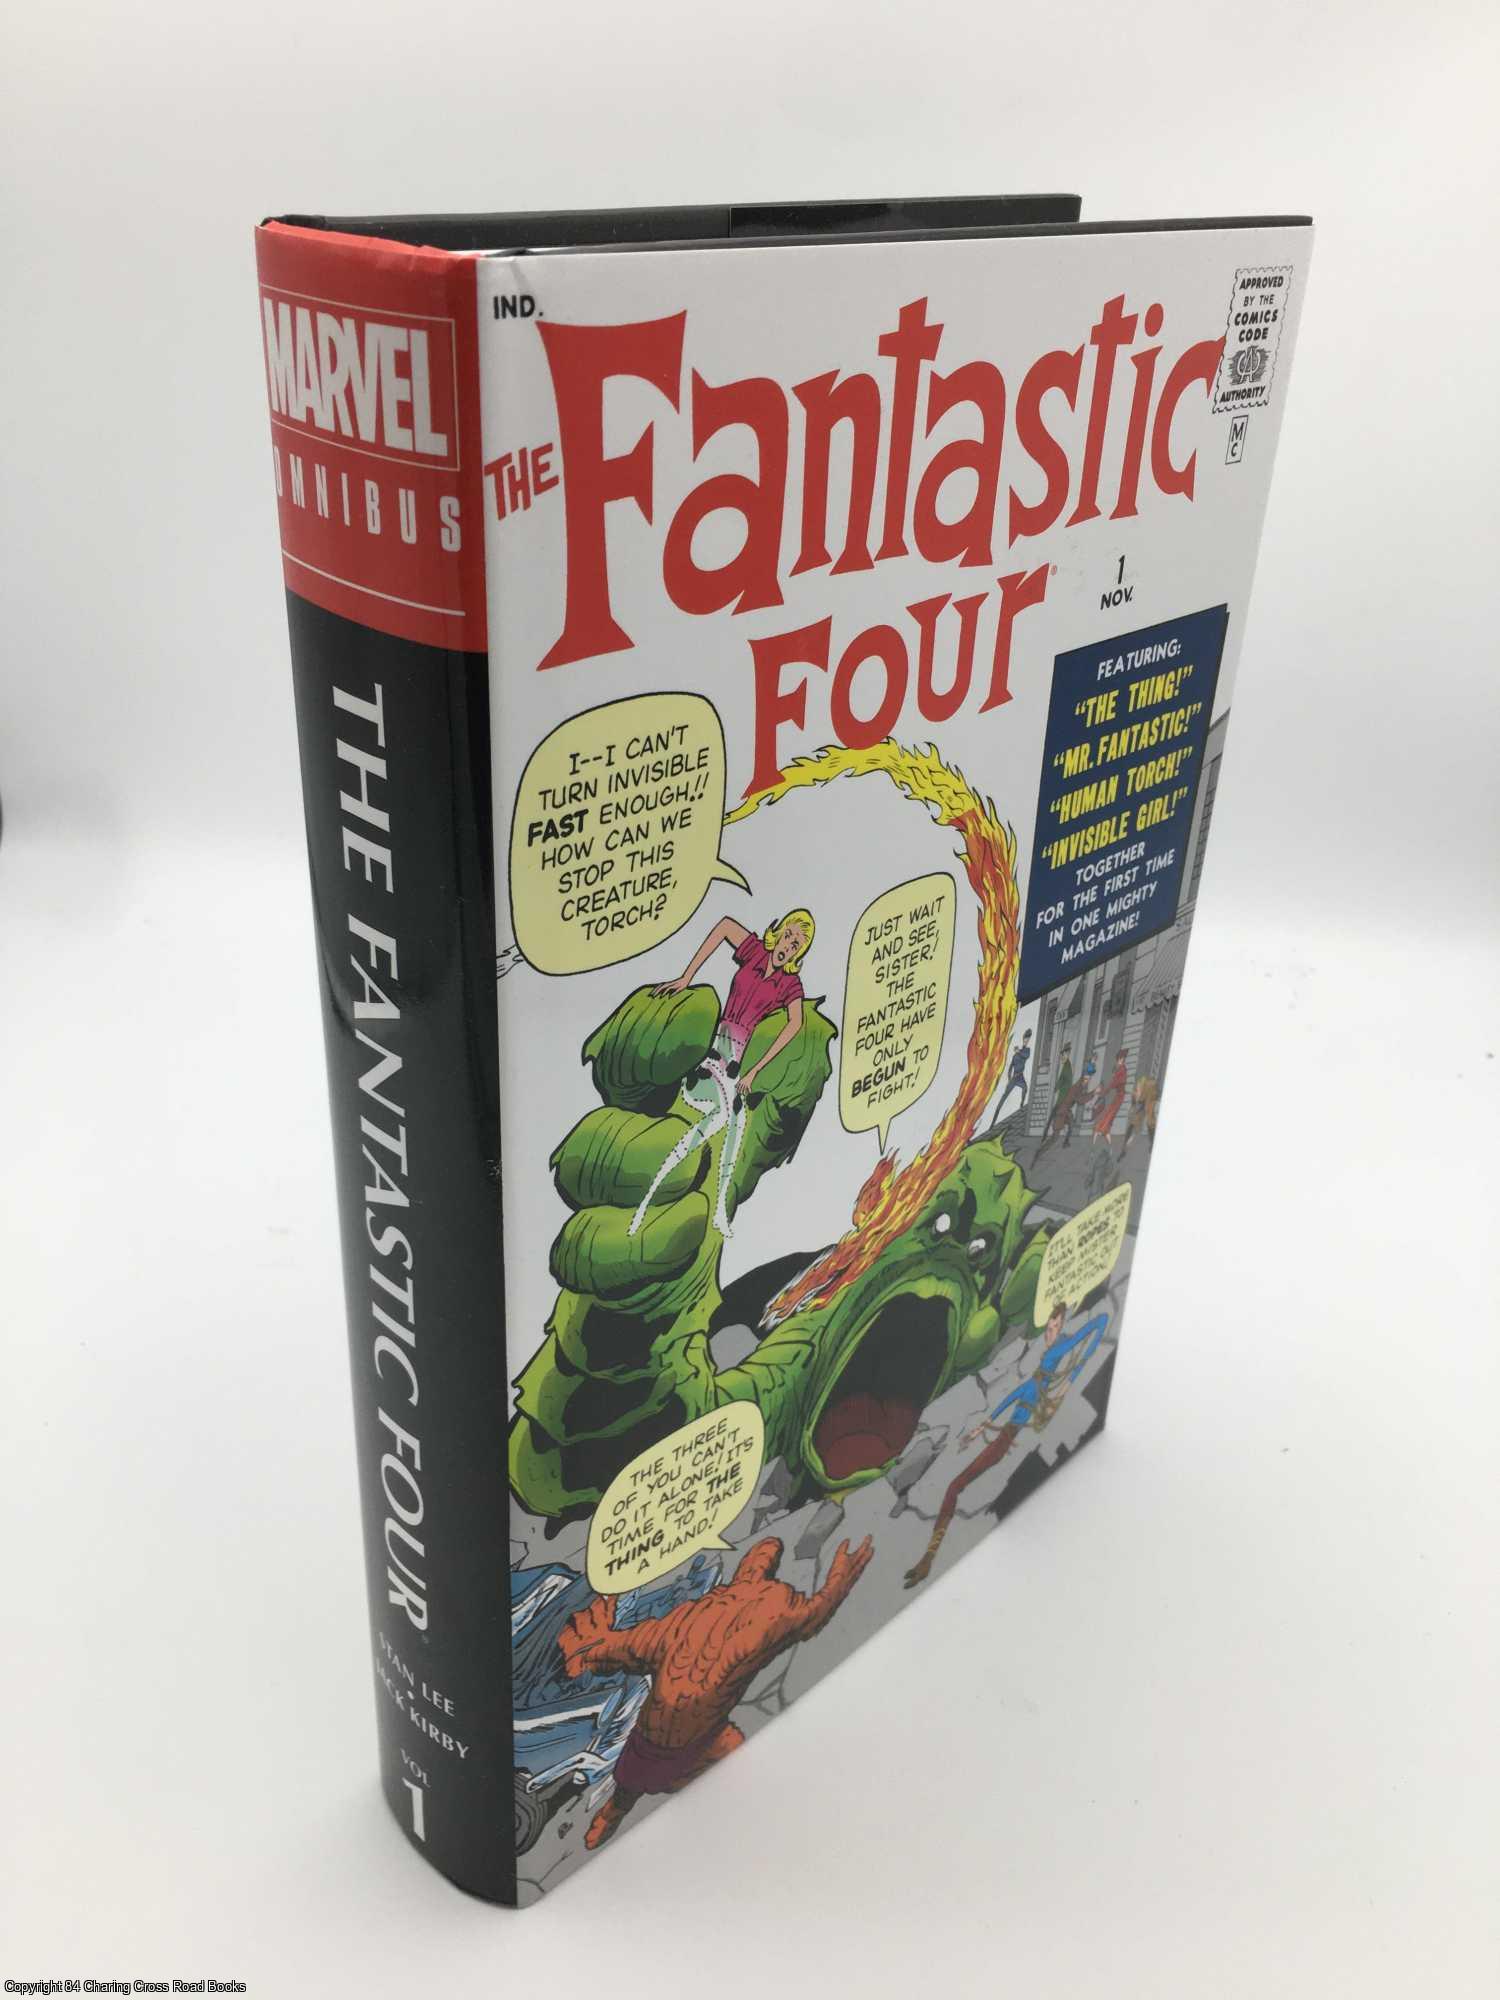 The Fantastic Four Omnibus Volume 1 by Stan Lee, Jack Kirby on 84 Charing  Cross Rare Books